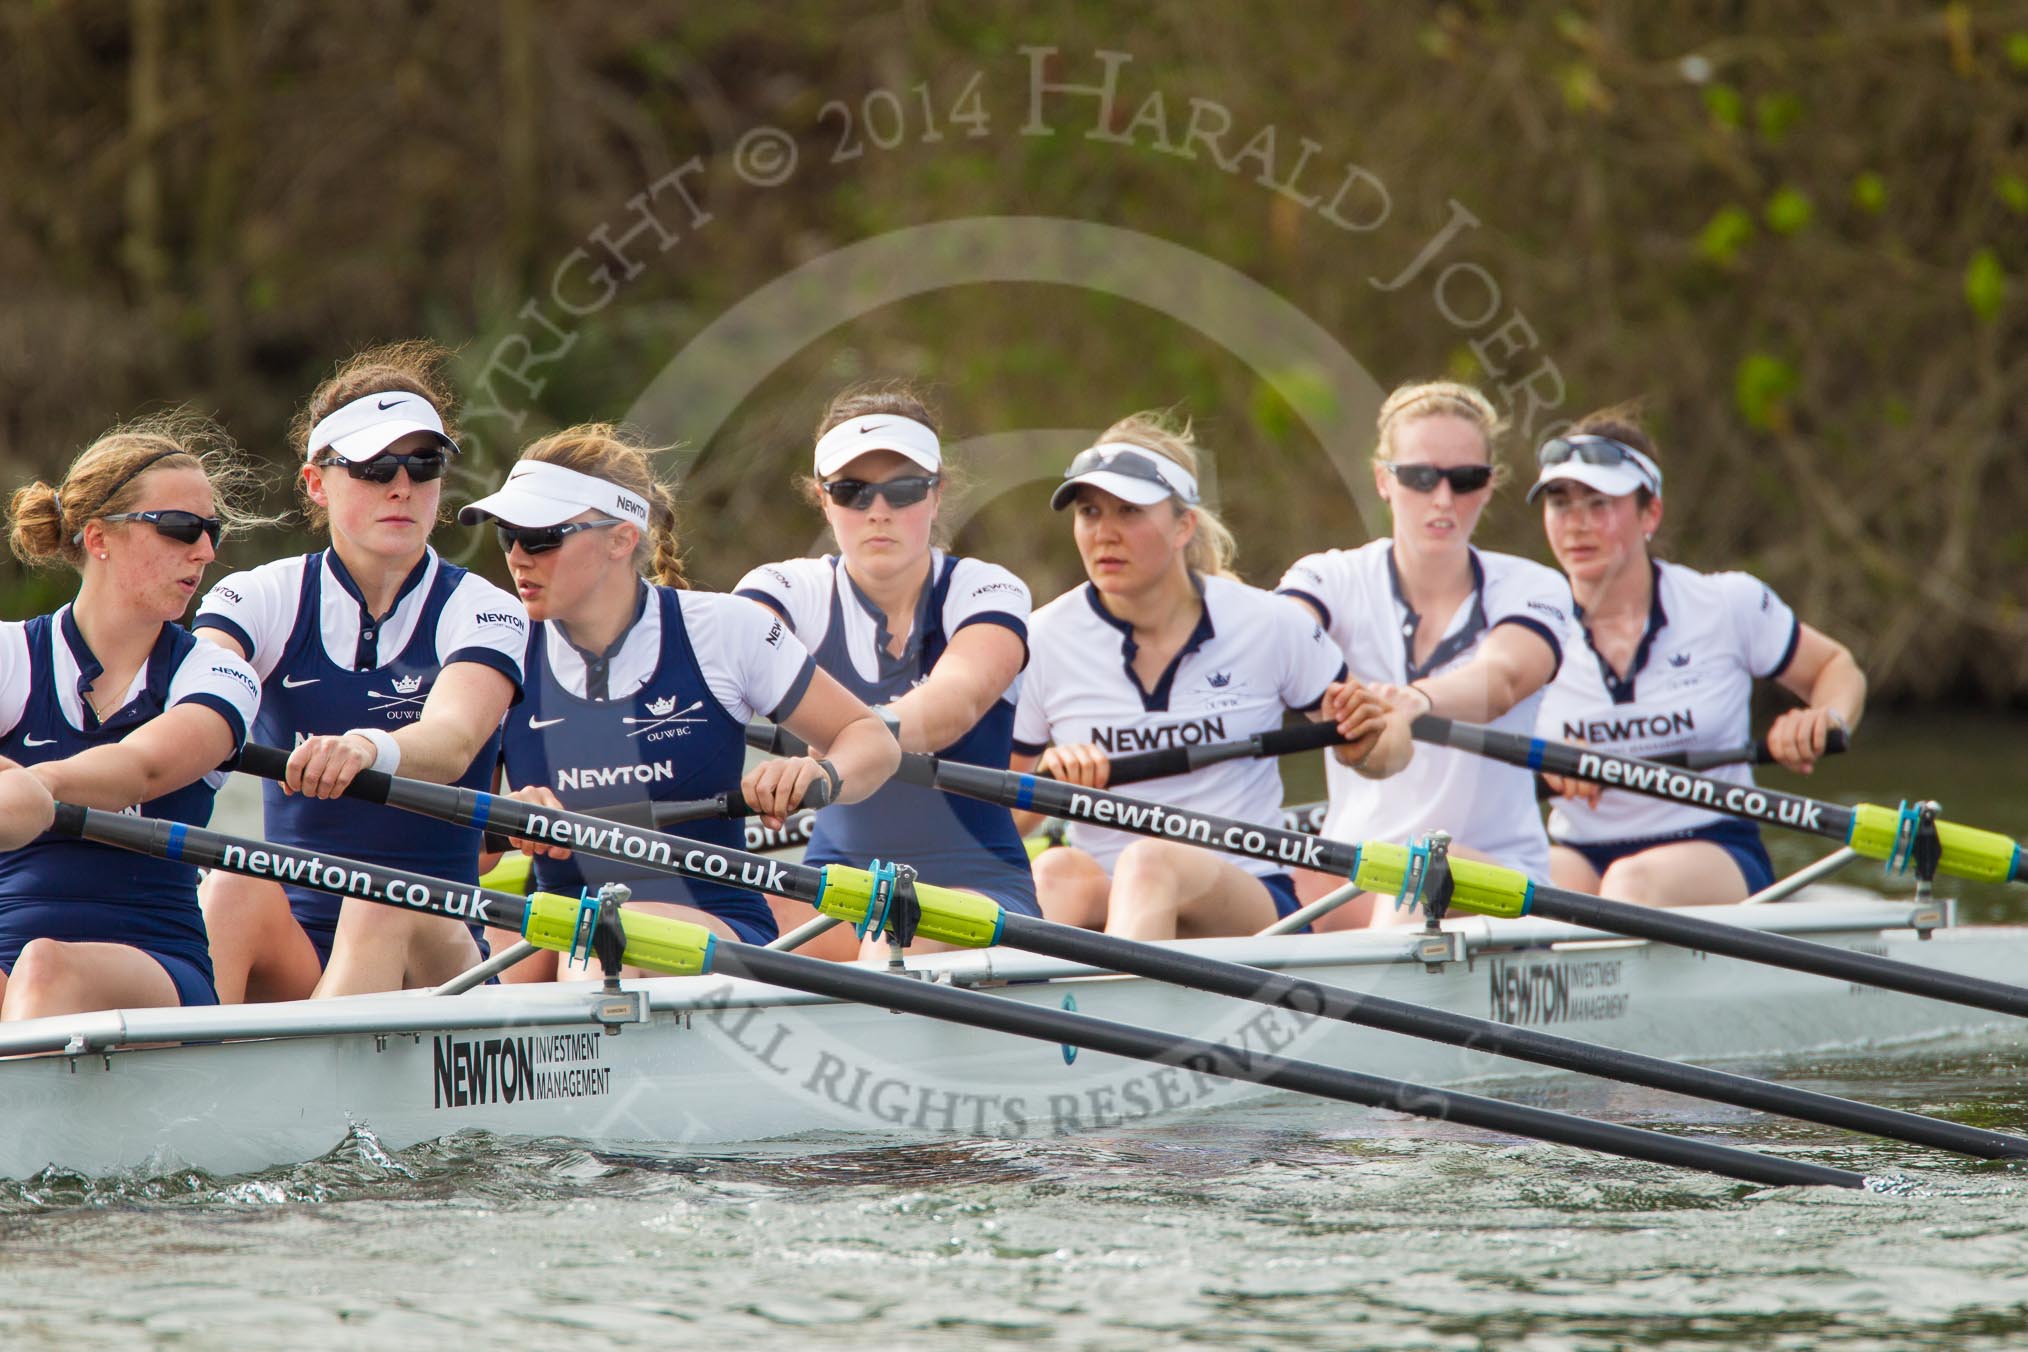 The Women's Boat Race and Henley Boat Races 2014: The Oxford Blue Boat just paddling up the river before the start of the 2014 Newton Women's Boat Race: 7 Anastasia Chitty, 6 Laura Savarese, 5 Nadine Graedel Iberg, 4 Lauren Kedar, 3 Maxie Scheske, 2 Alice Carrington-Windo, bow Elizabeth Fenje..
River Thames,
Henley-on-Thames,
Buckinghamshire,
United Kingdom,
on 30 March 2014 at 14:23, image #184